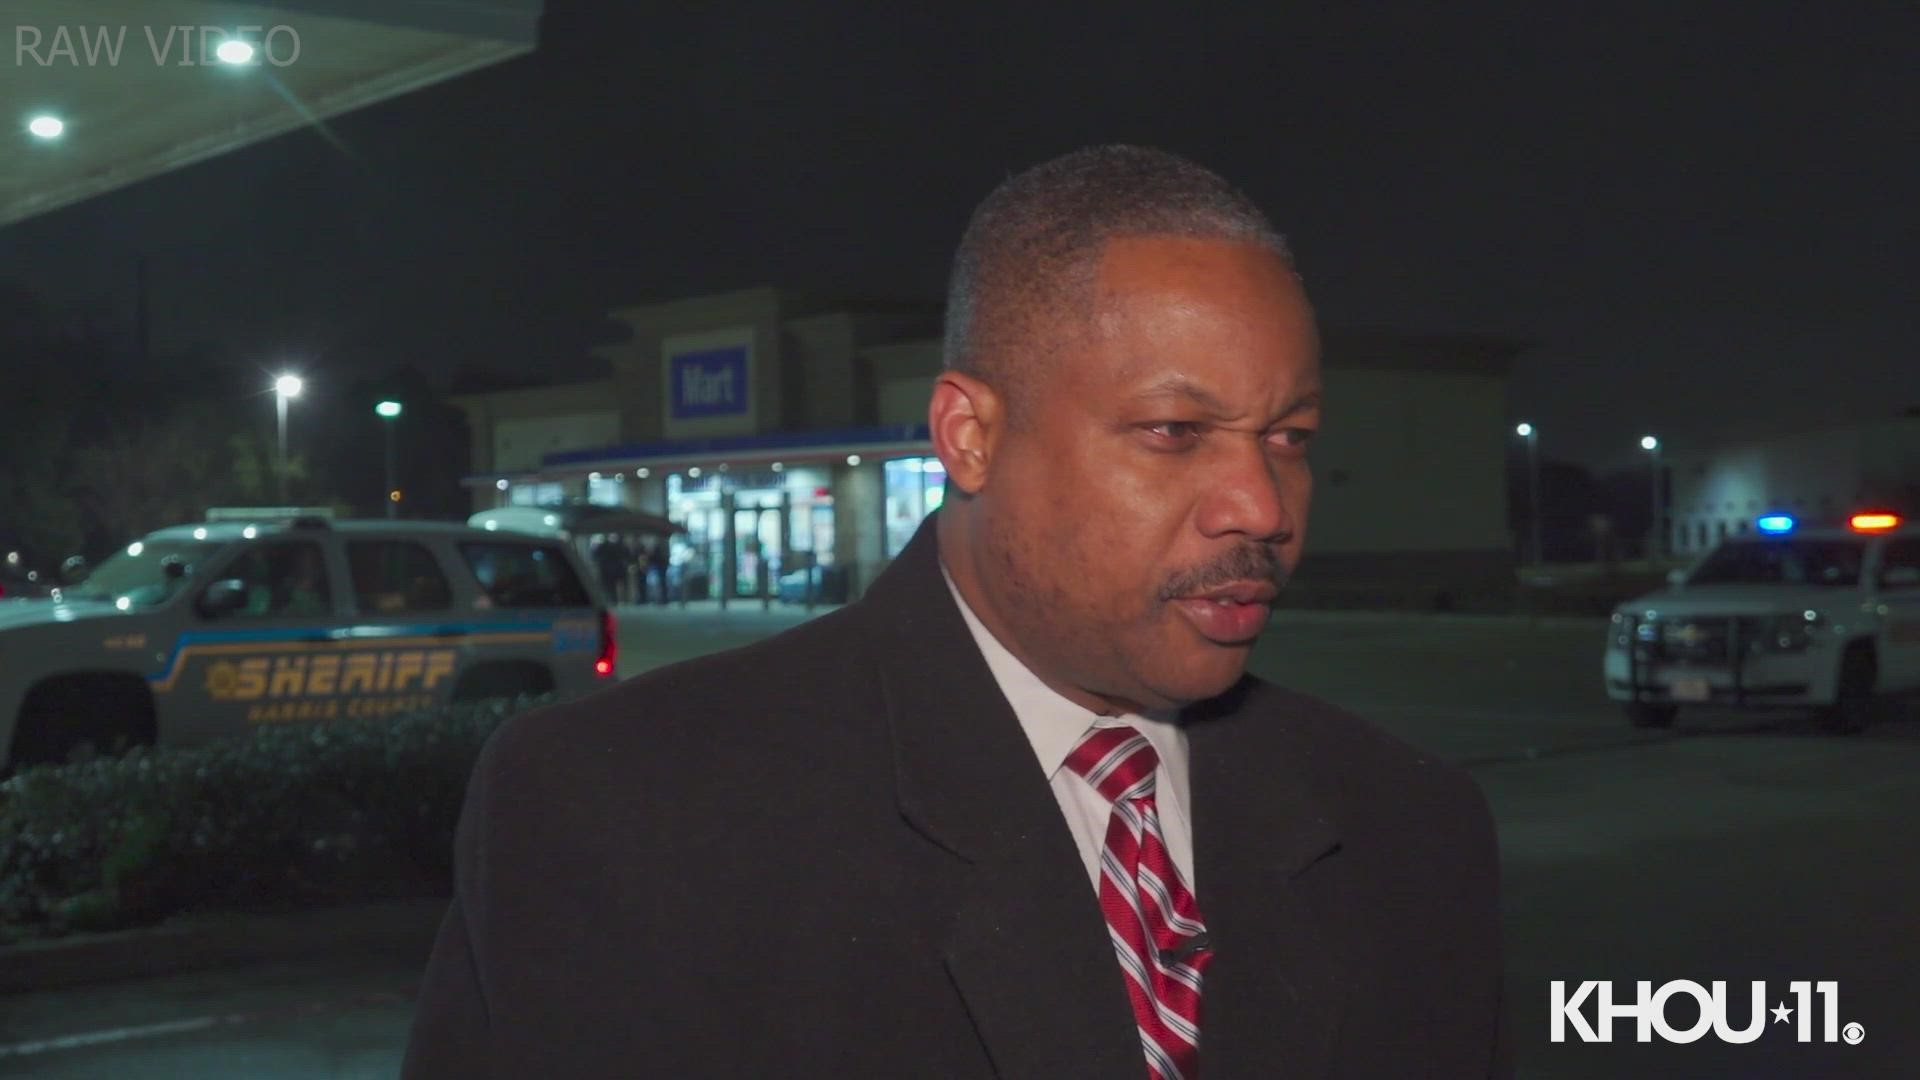 Deputies say the shooting happened Saturday evening at a gas station in northwest Harris County.